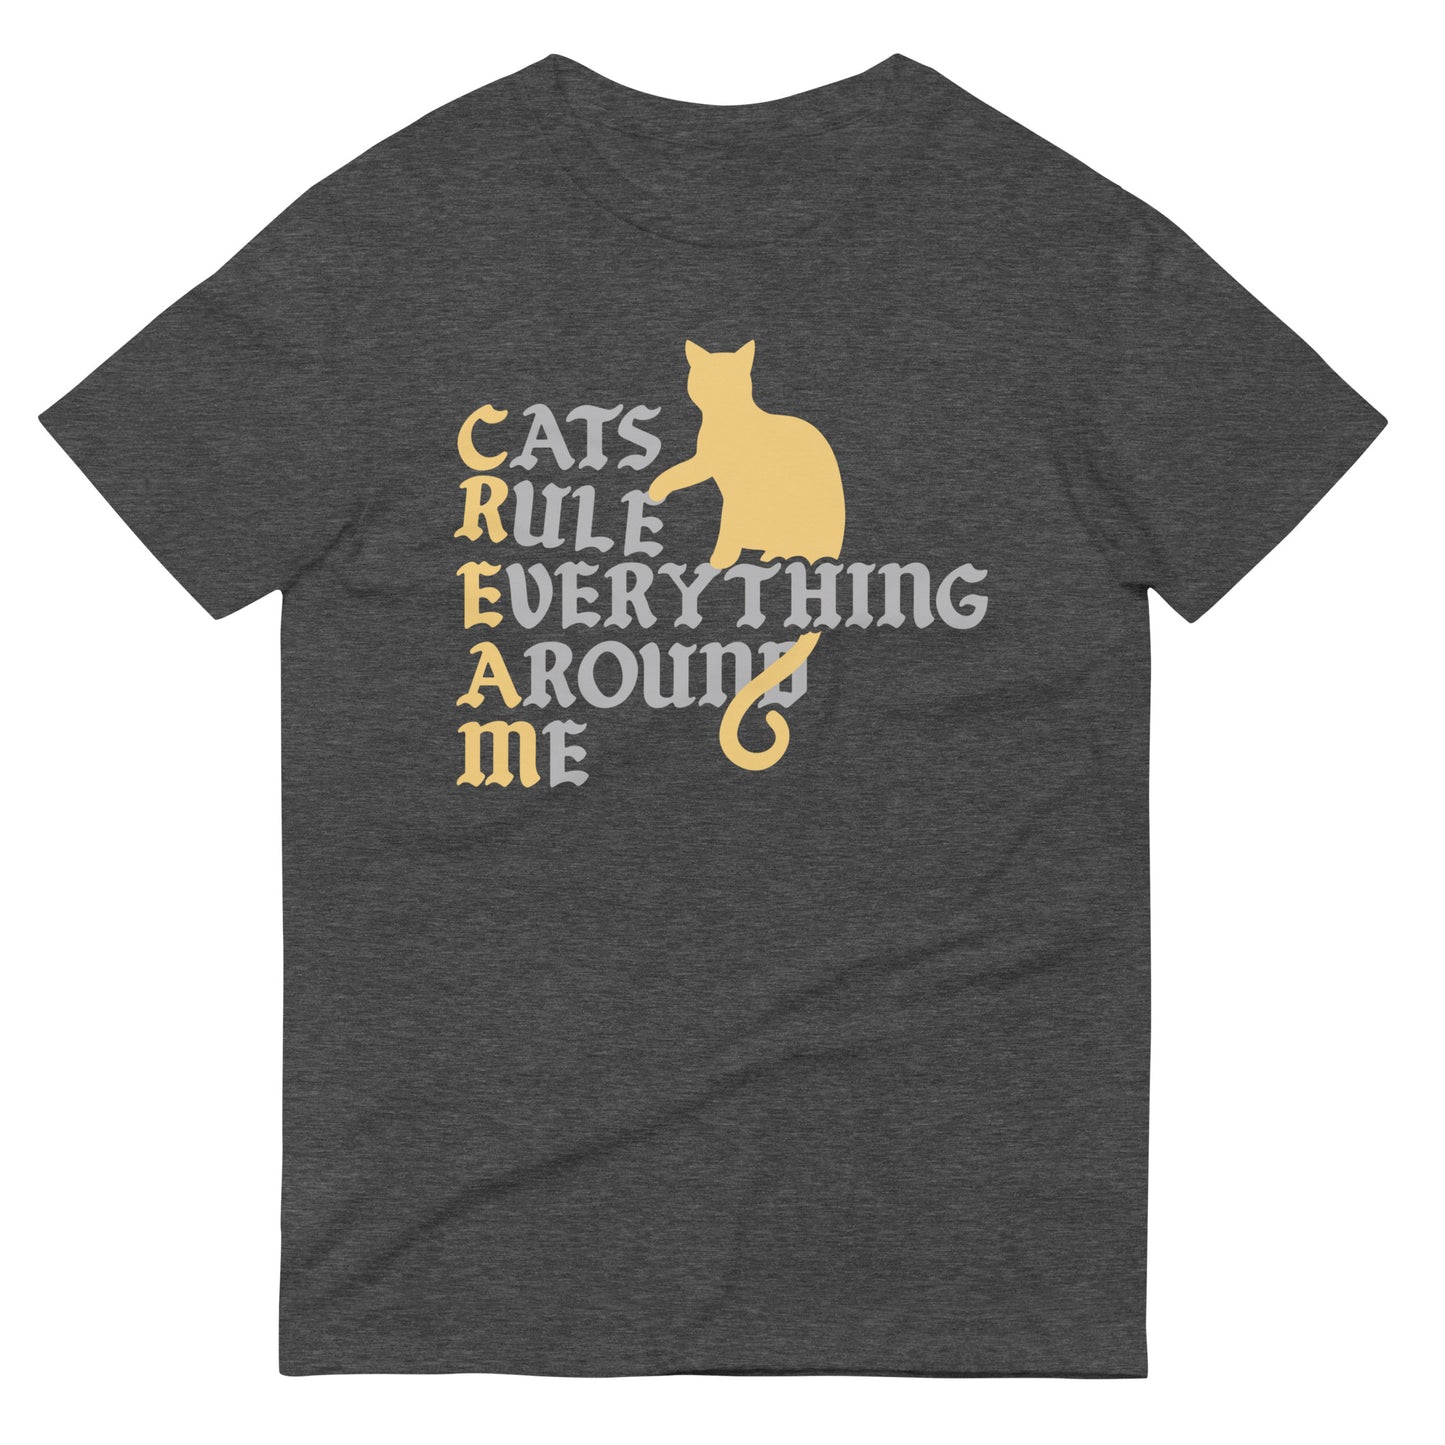 Cats Rule Everything Around Me Men's Signature Tee